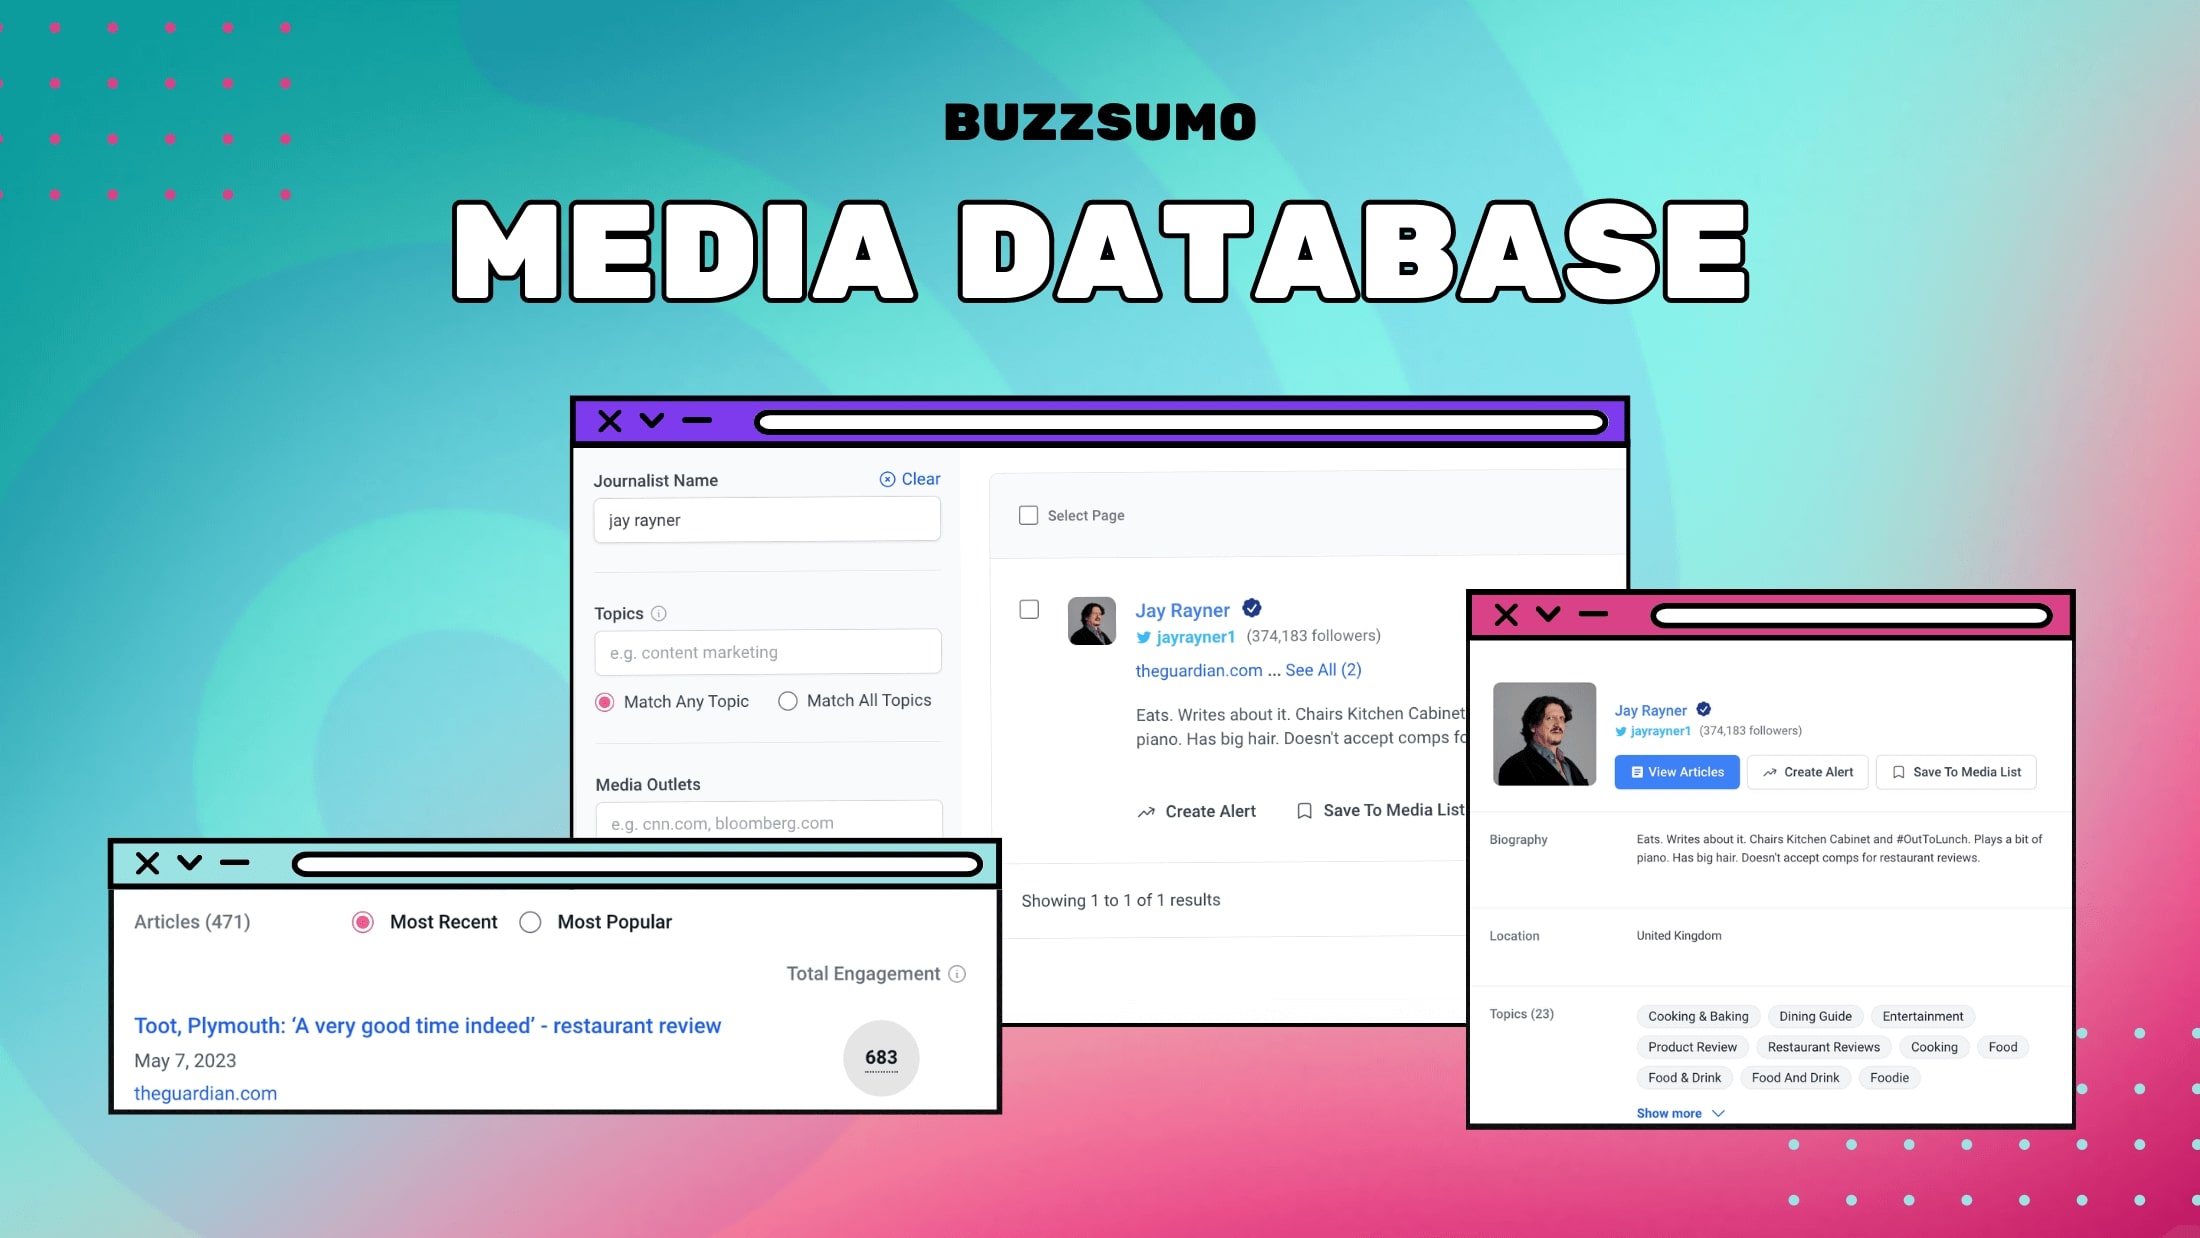 BuzzSumo’s Journalist Database: See What Journalists Create So You Can Better Connect